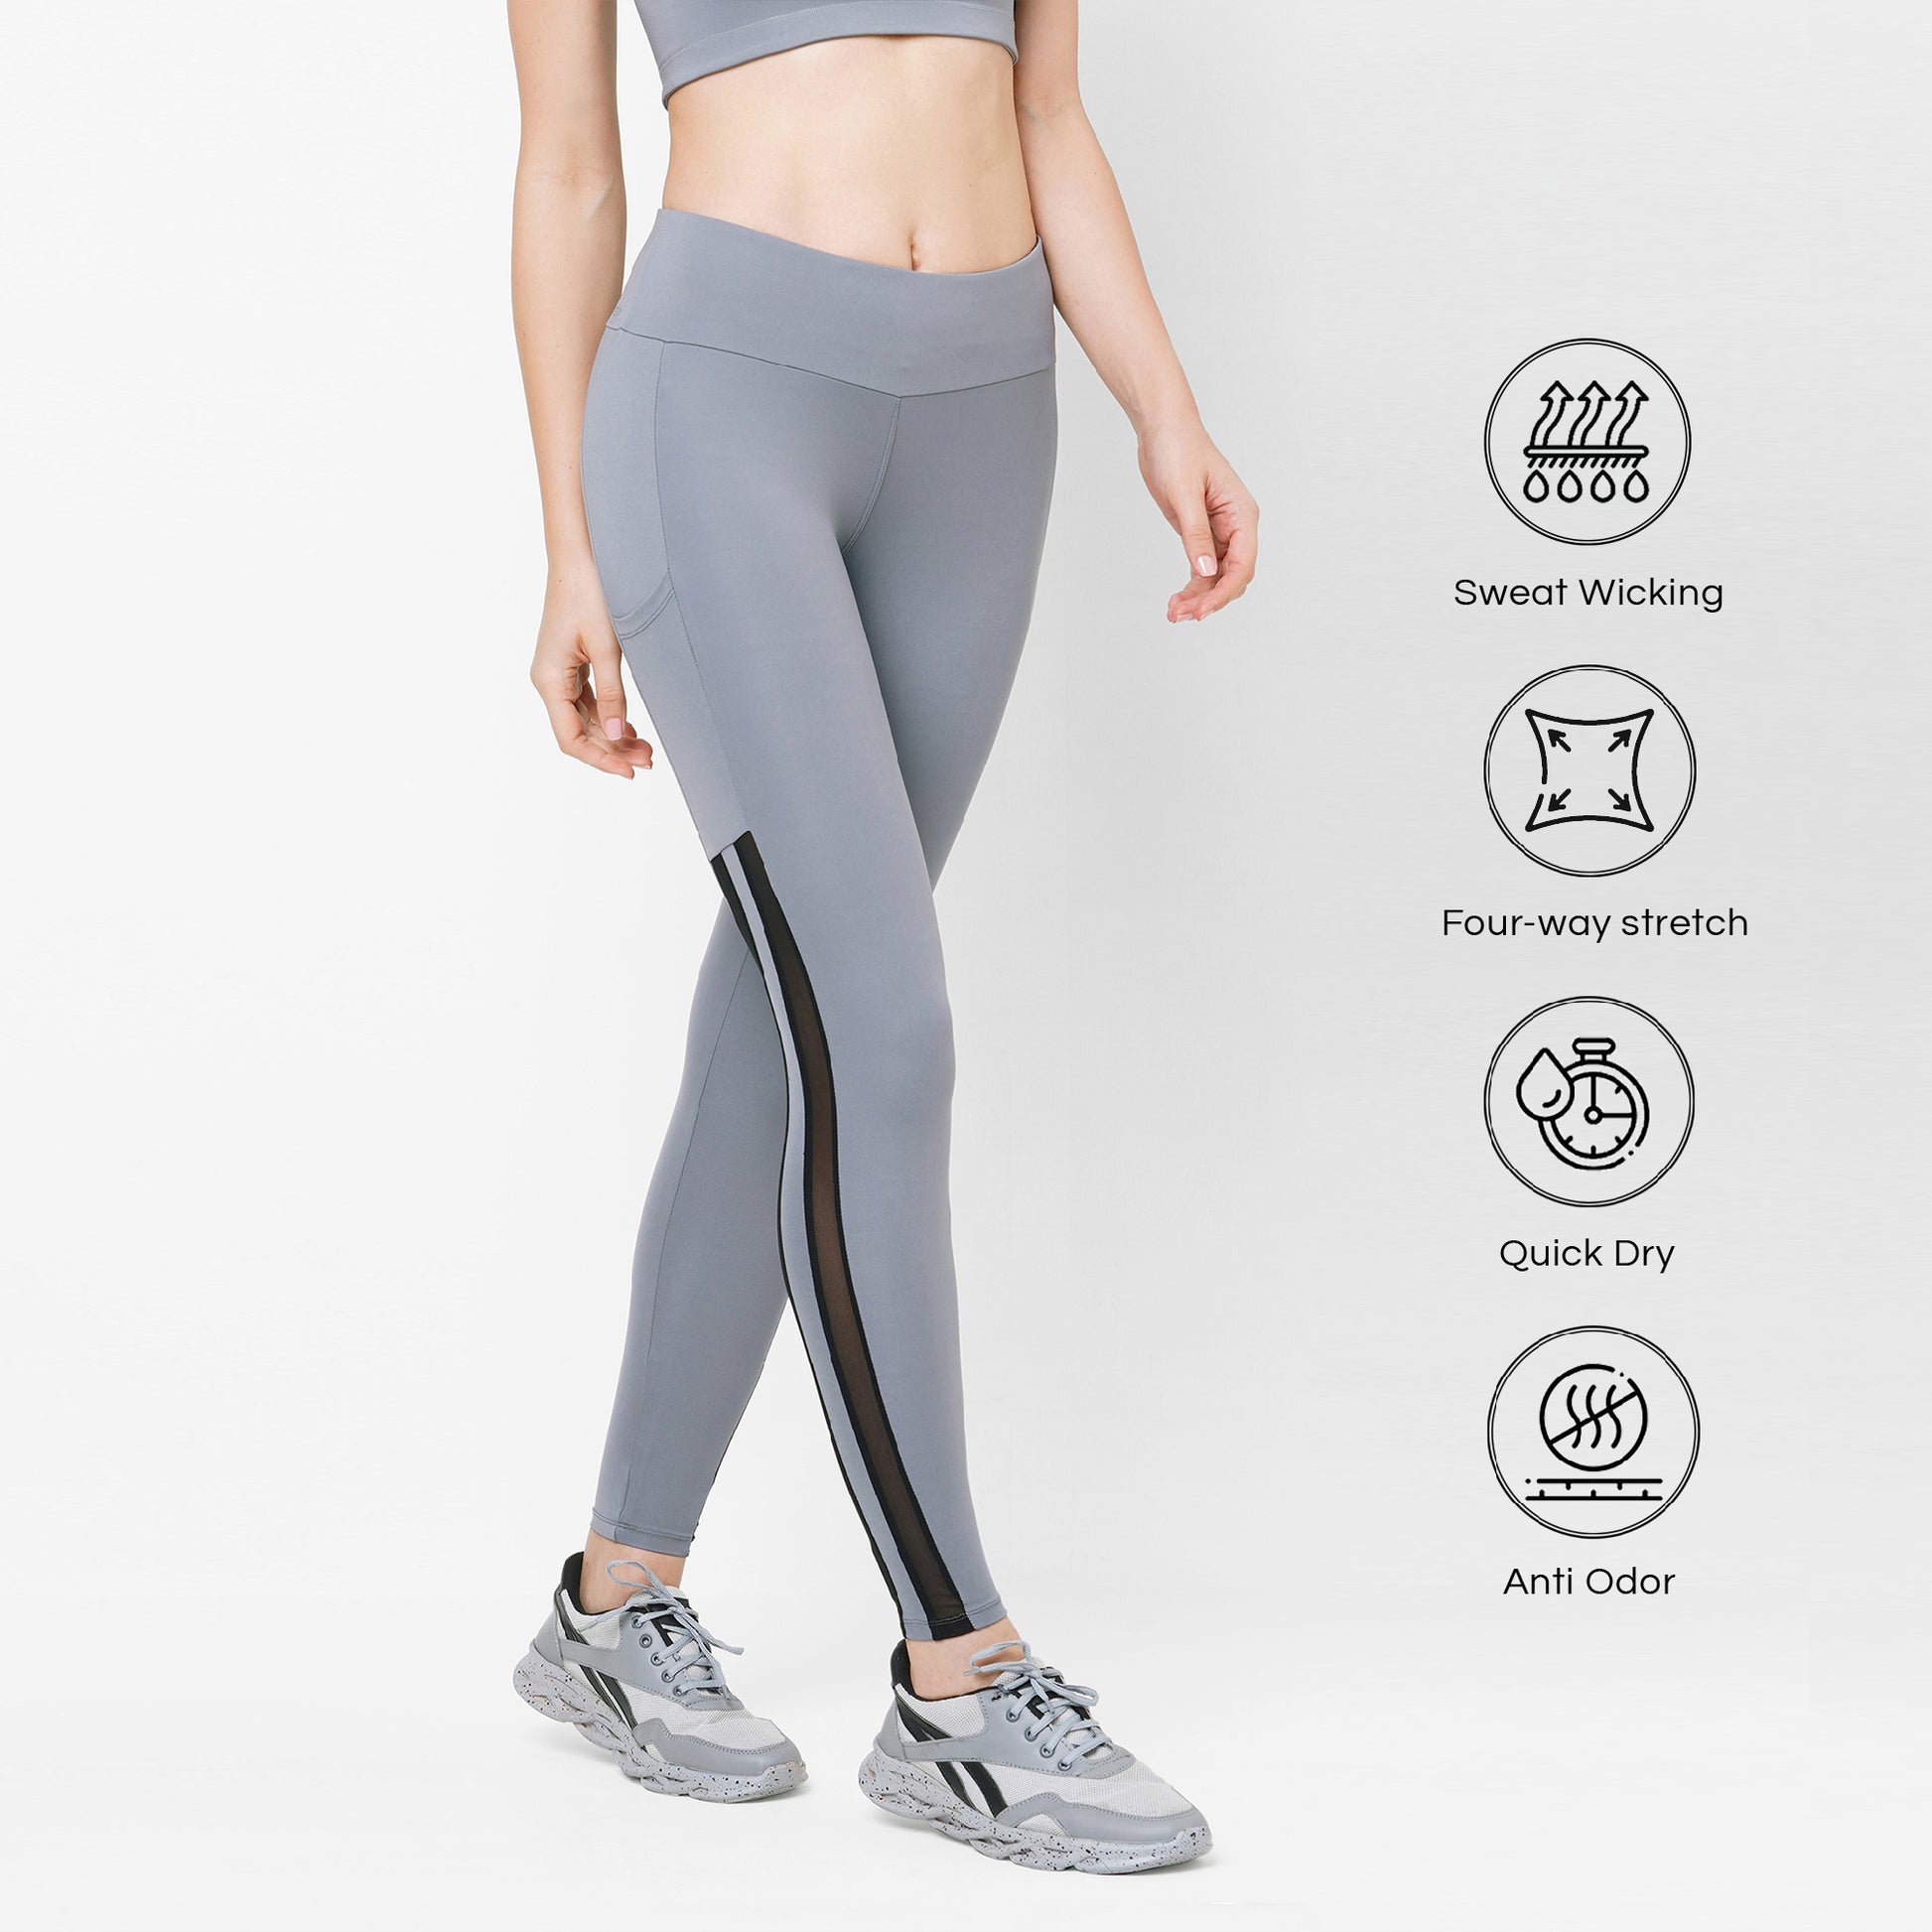 Buy Women's Microfiber Elastane Stretch Panel Printed Performance Leggings  with Coin Pocket and Stay Dry Technology - Sky Captain MW21